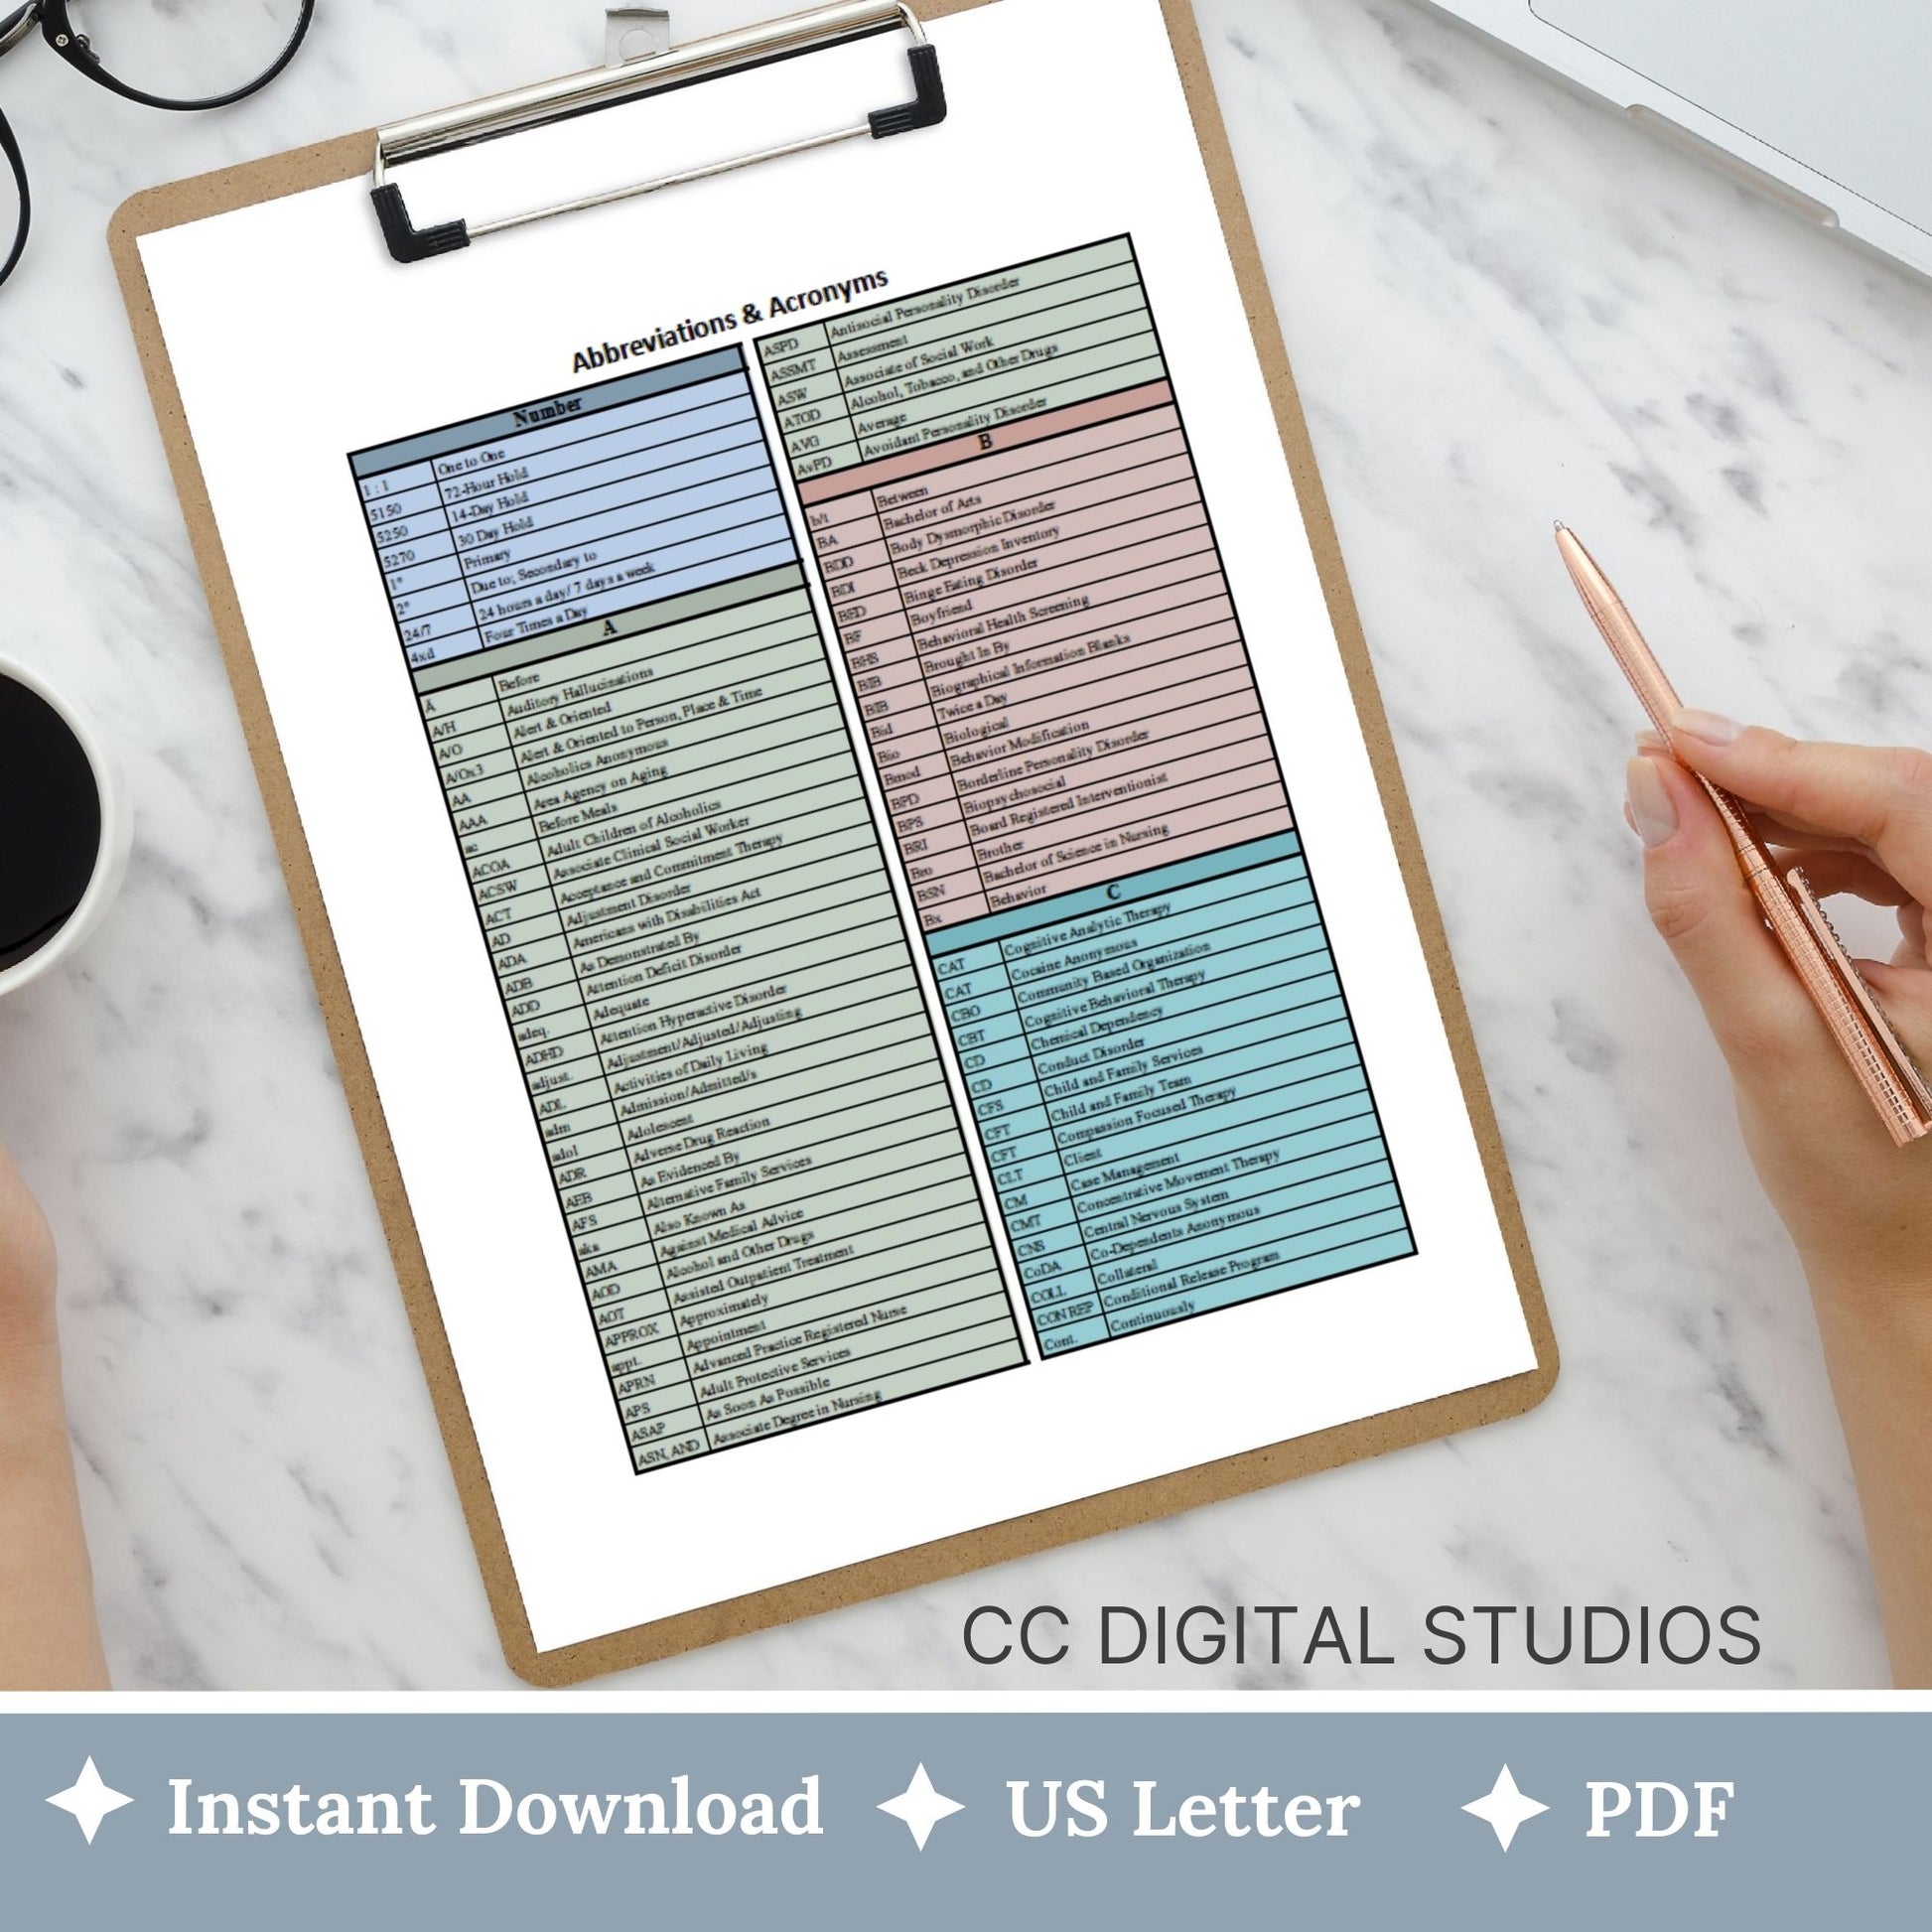 450+ abbreviations and acronyms commonly used in mental health private practice and counseling offices.  Organized alphabetically you can quickly reference this cheat sheet